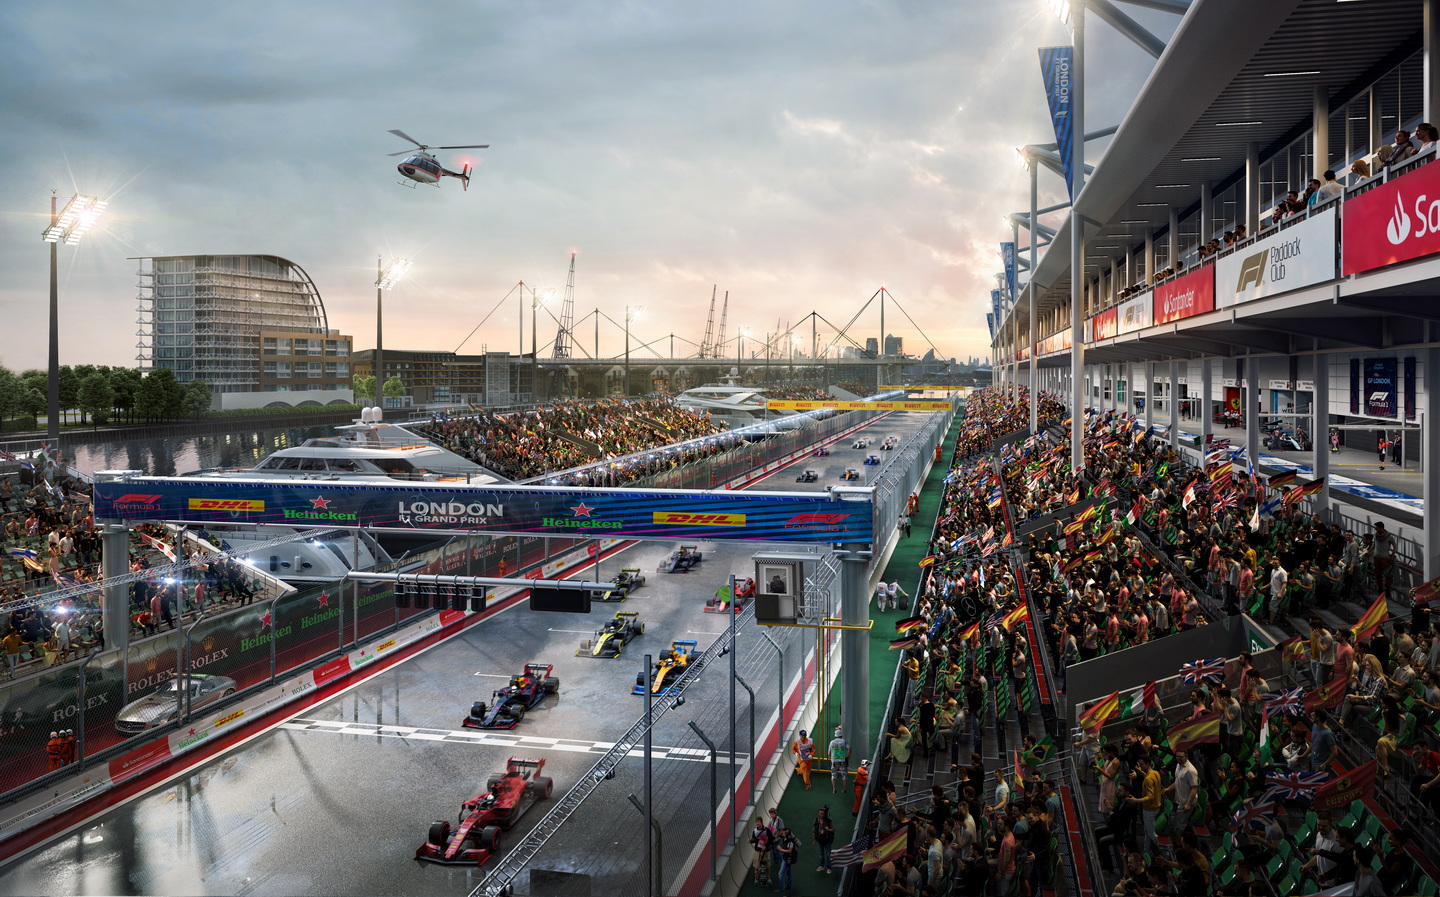 CGI Middle-East based group Dar draws up plan for Royal Docks redevelopment and F1 grand prix plan